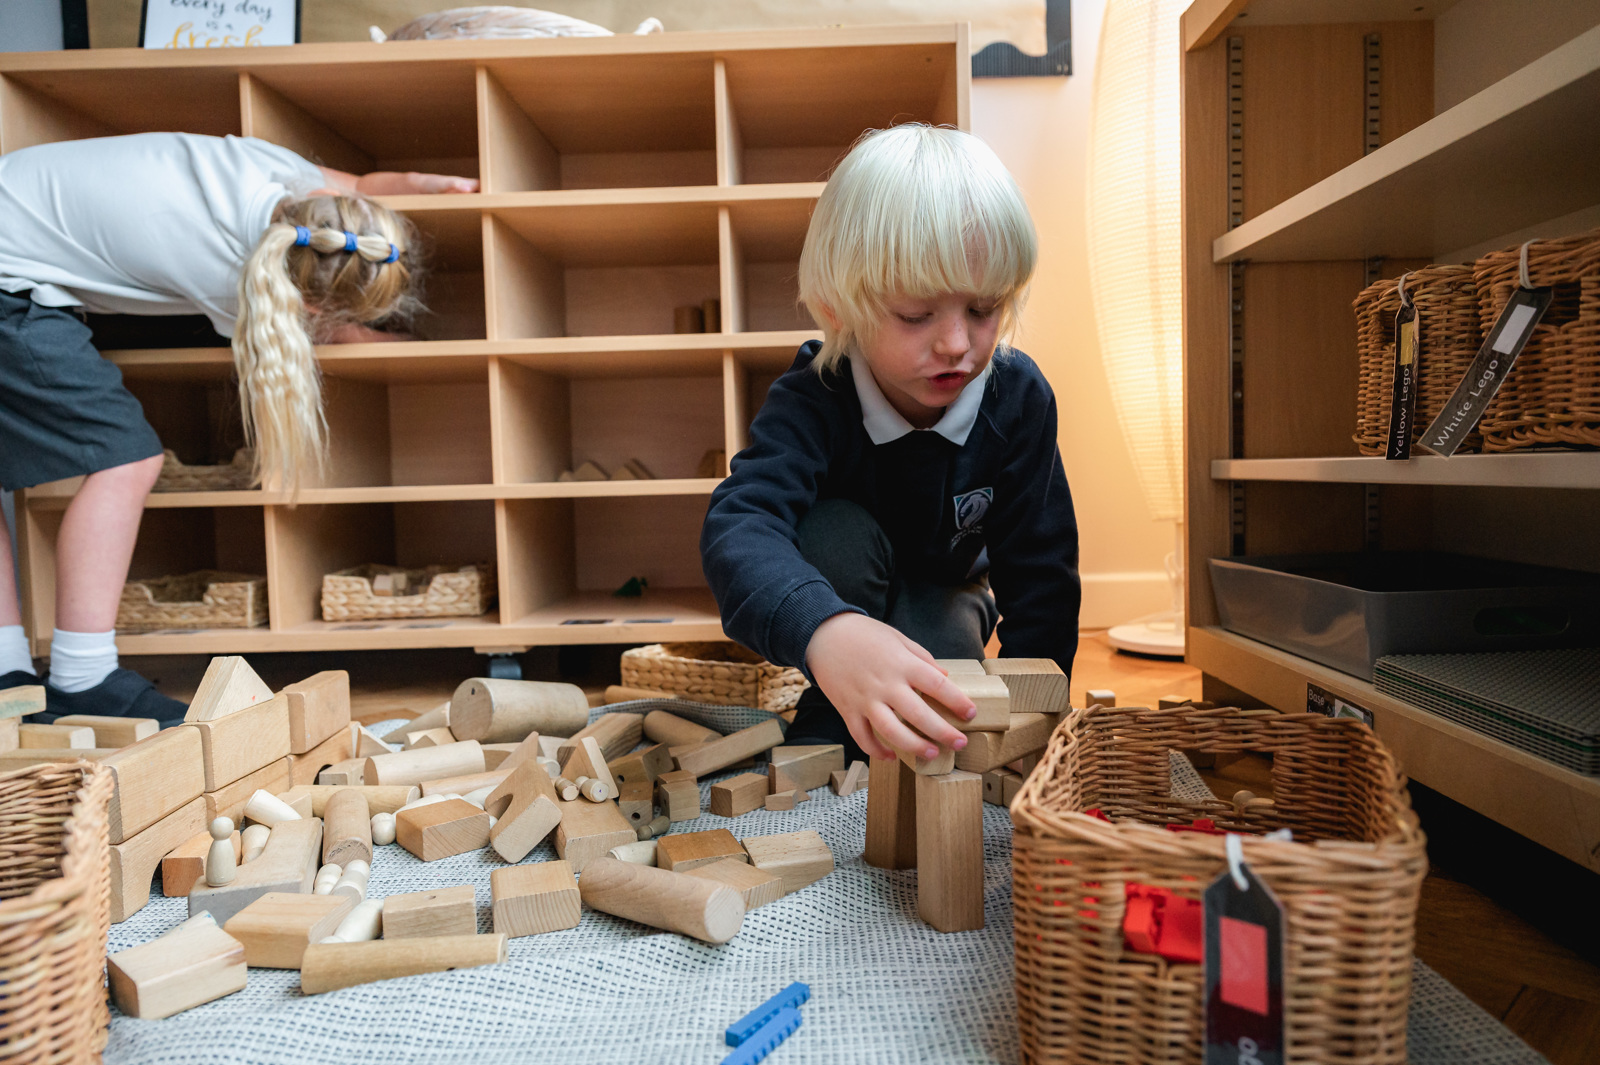 A boy uses wooden blocks to build